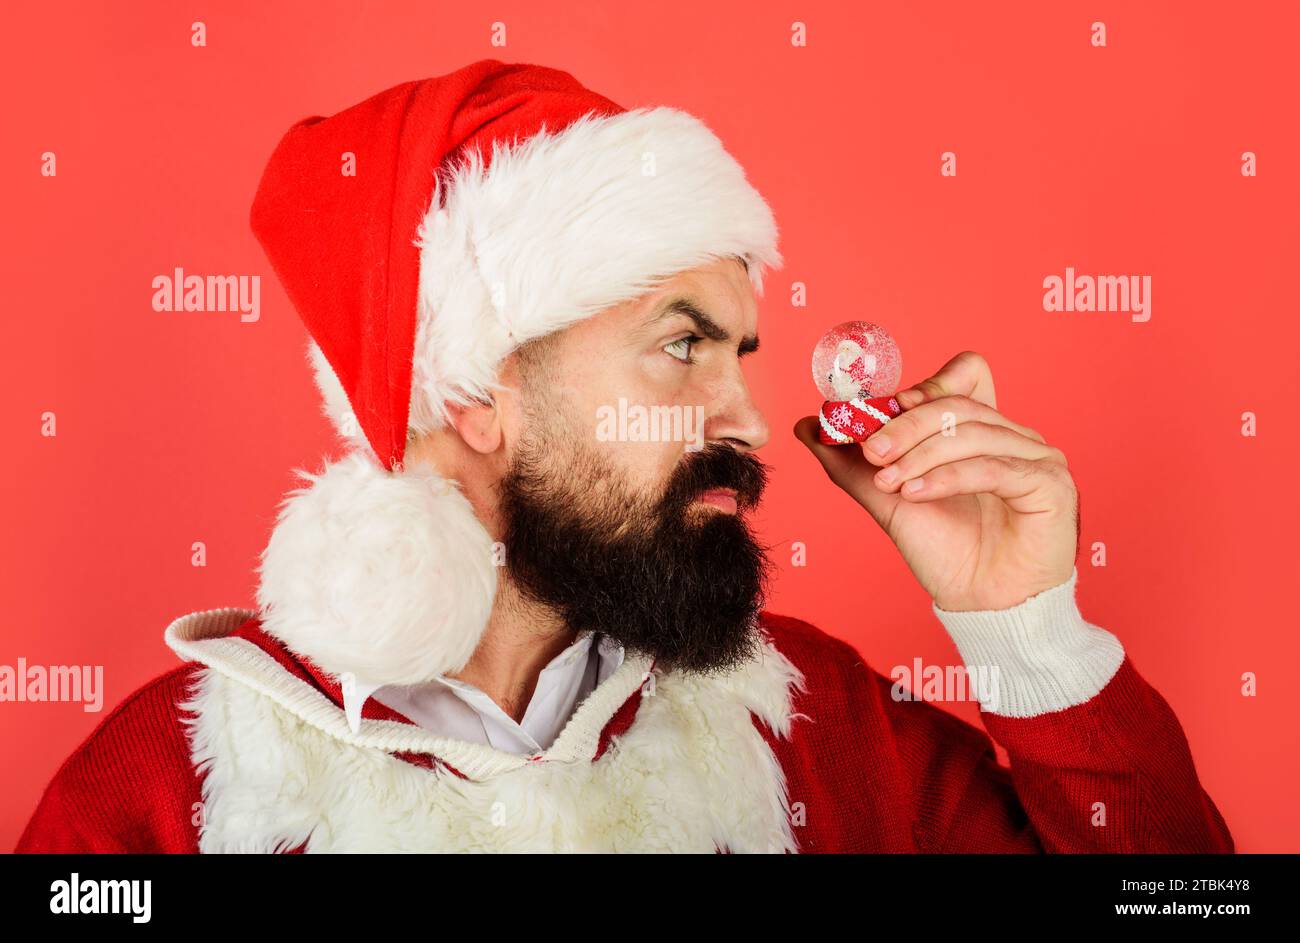 Christmas decoration. Bearded man in Santa hat with small snowglobe. Christmas snowball with little with Santa Claus inside and floating bright snow Stock Photo